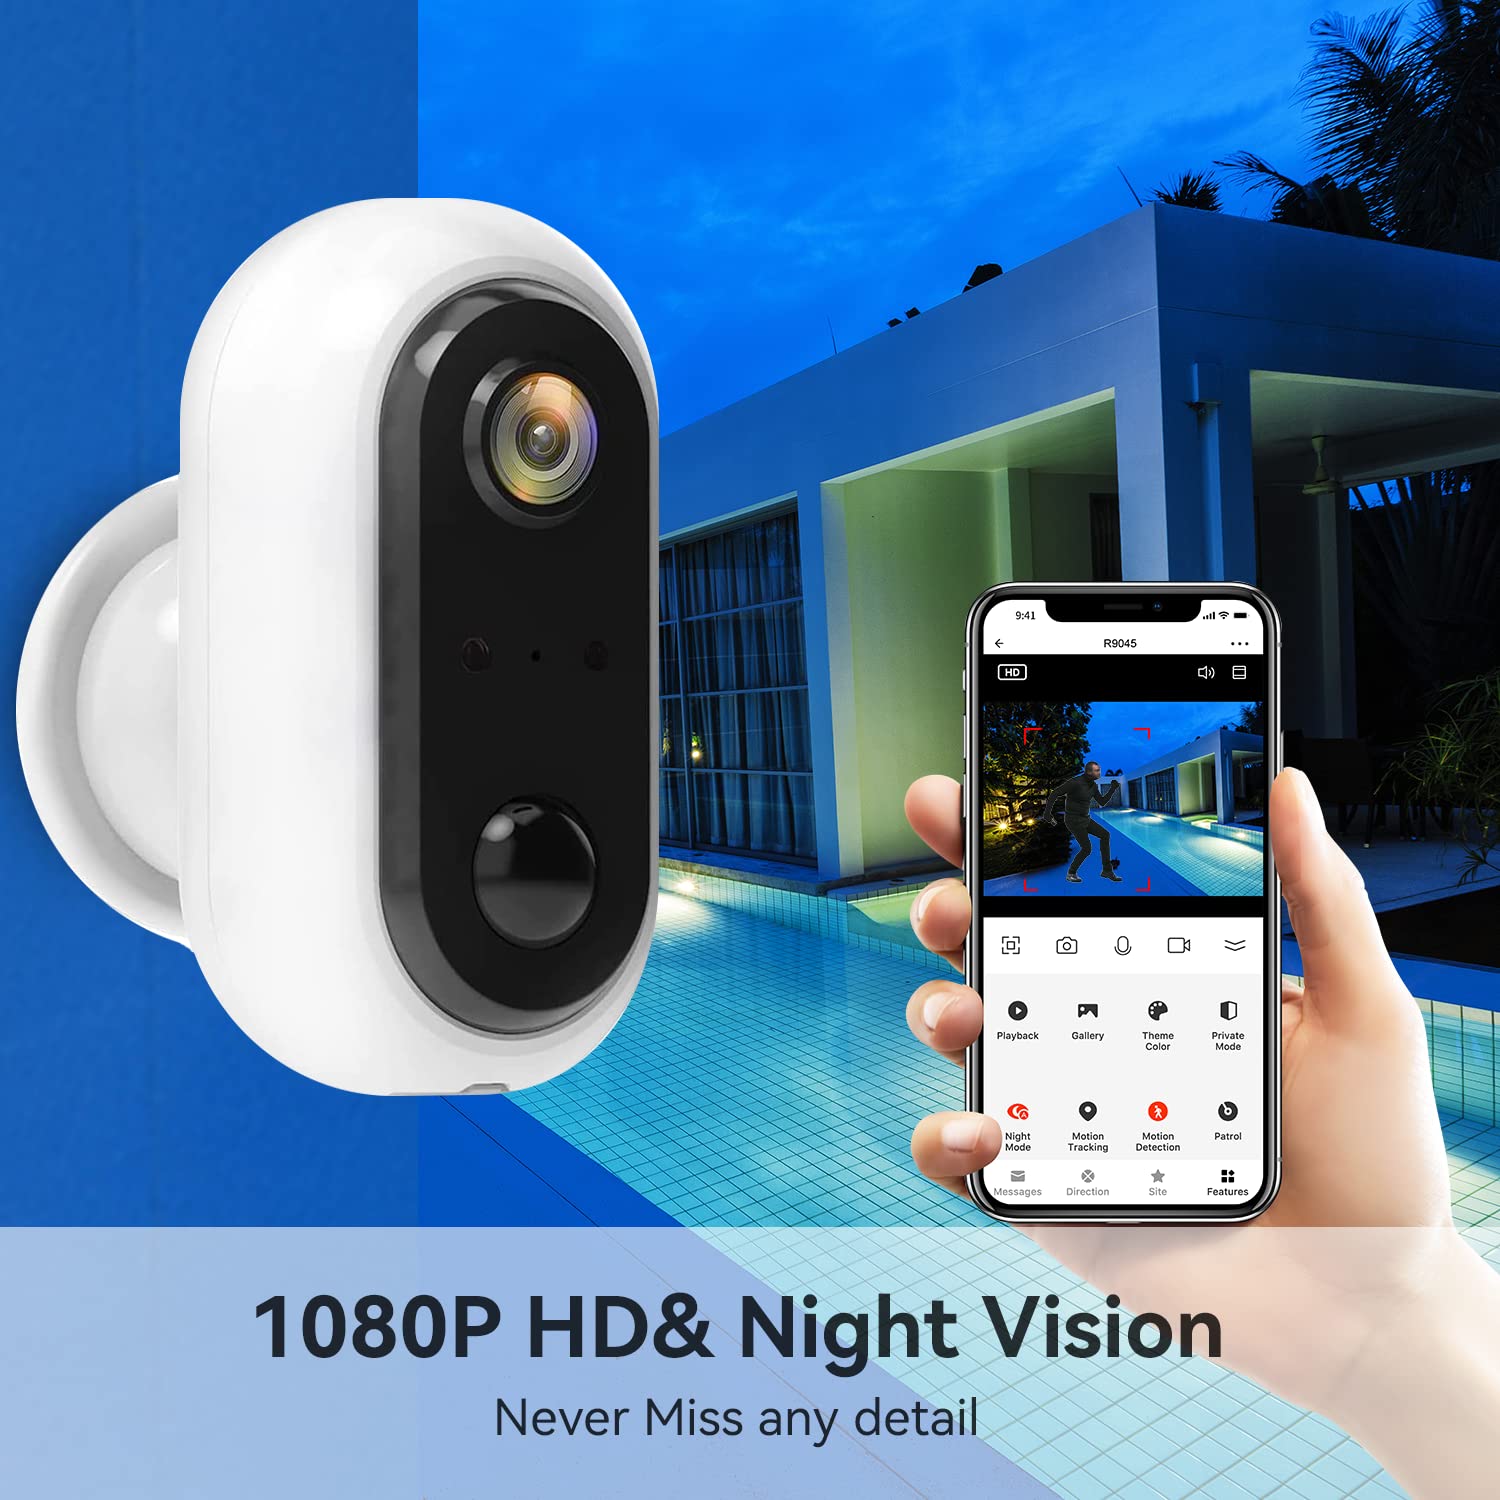 VENZ 2.4G Wireless Battery Powered Camera, for Home Security,Night Vision,1080P Video with Motion Detection, 2-Way Audio, IP65 Waterproof, Work with Alexa